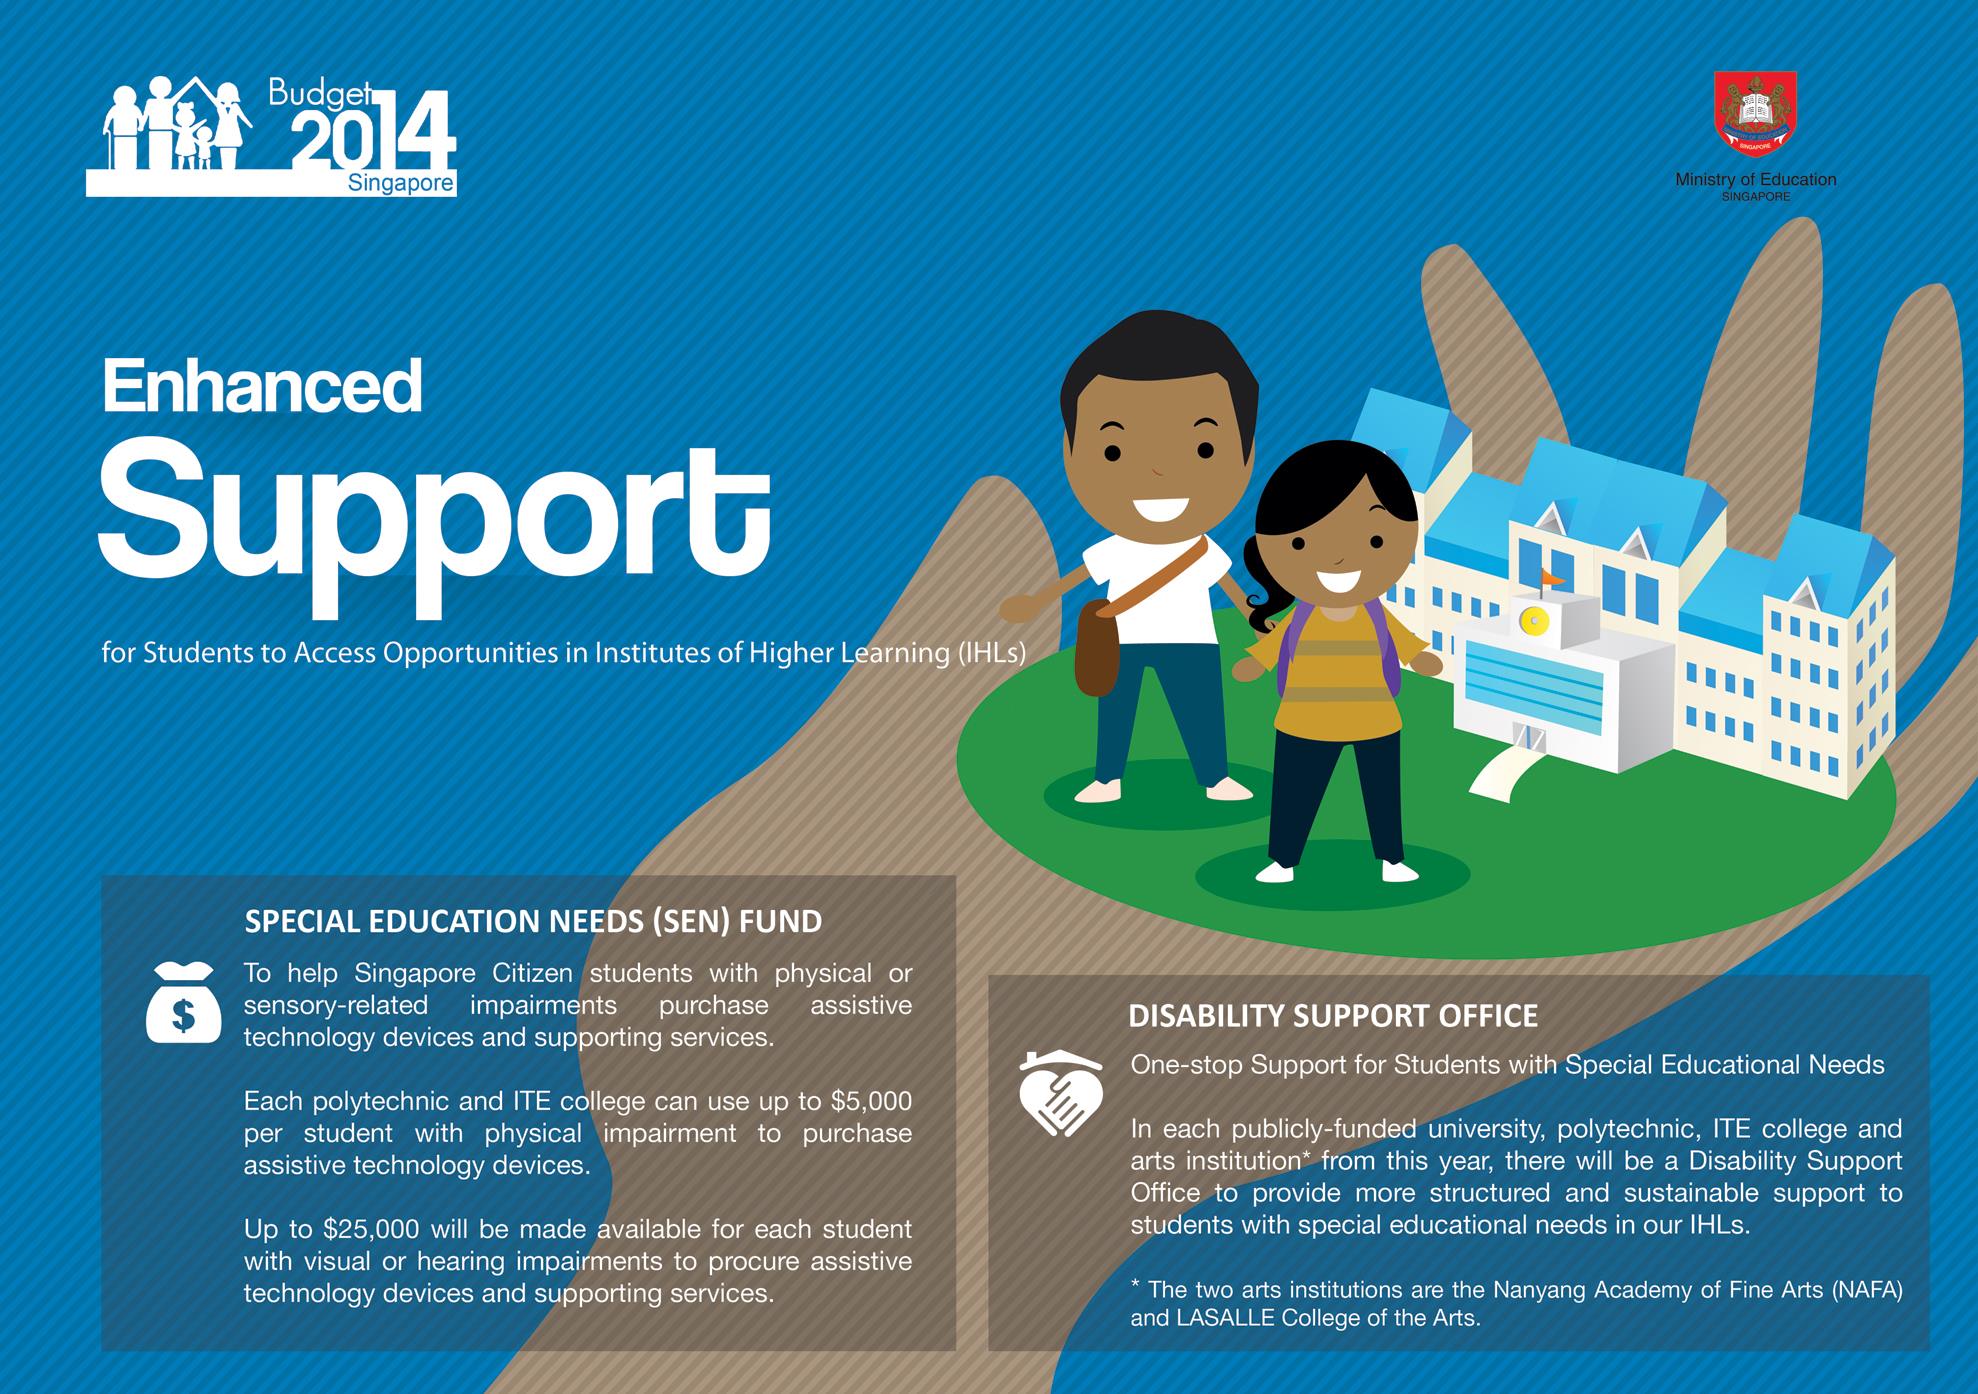 Enhanced Support for Students to Access Opportunities in IHLs